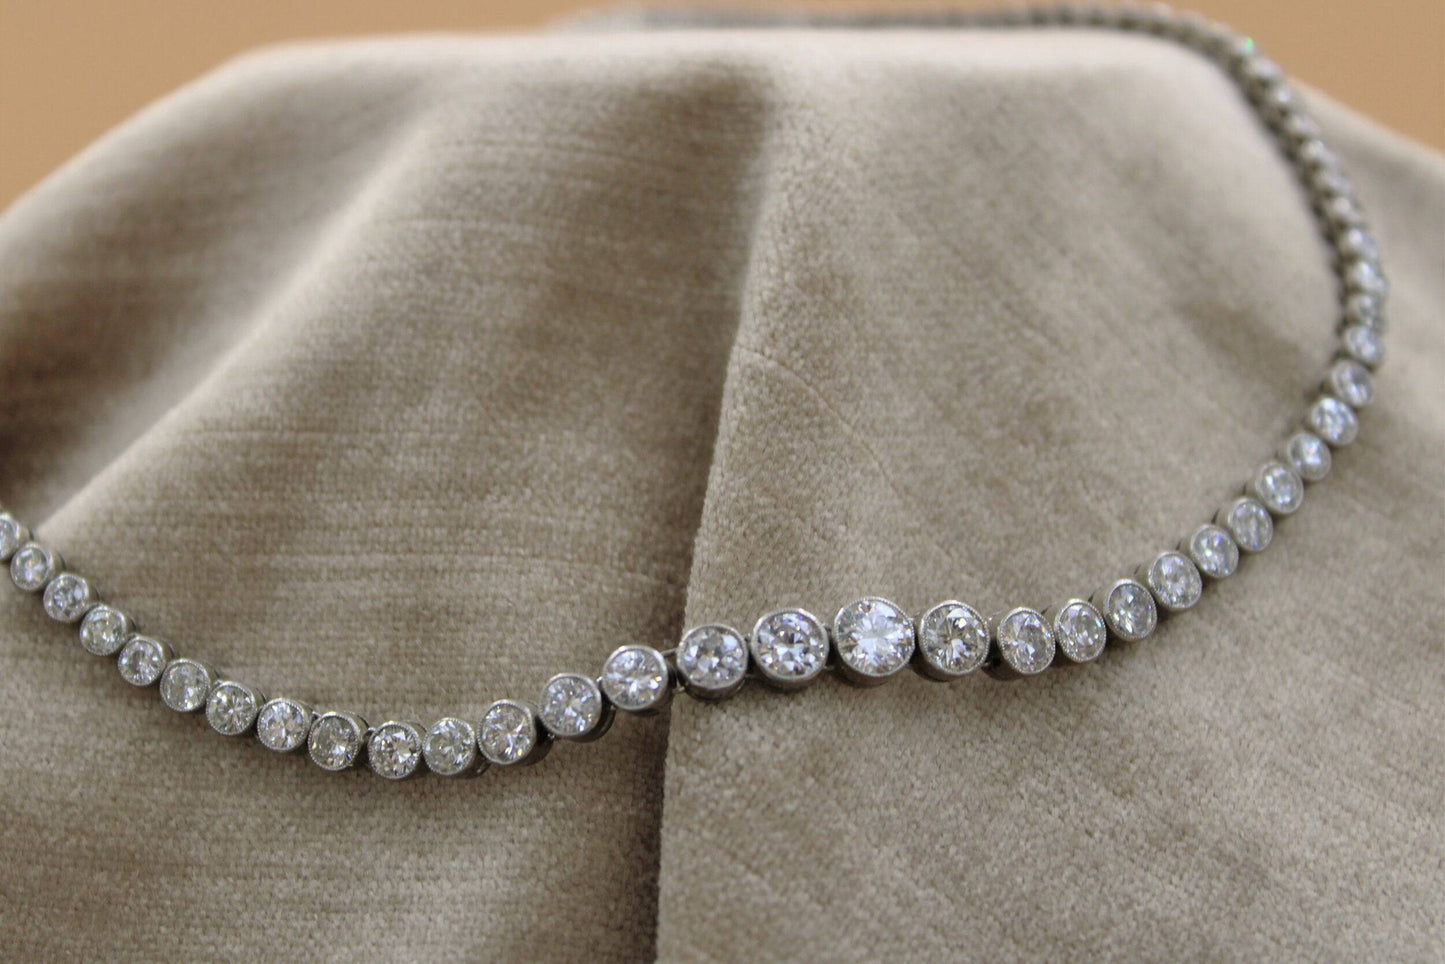 A very fine Diamond Riviere Necklace mounted in Platinum, Circa 1945 - Robin Haydock Antiques